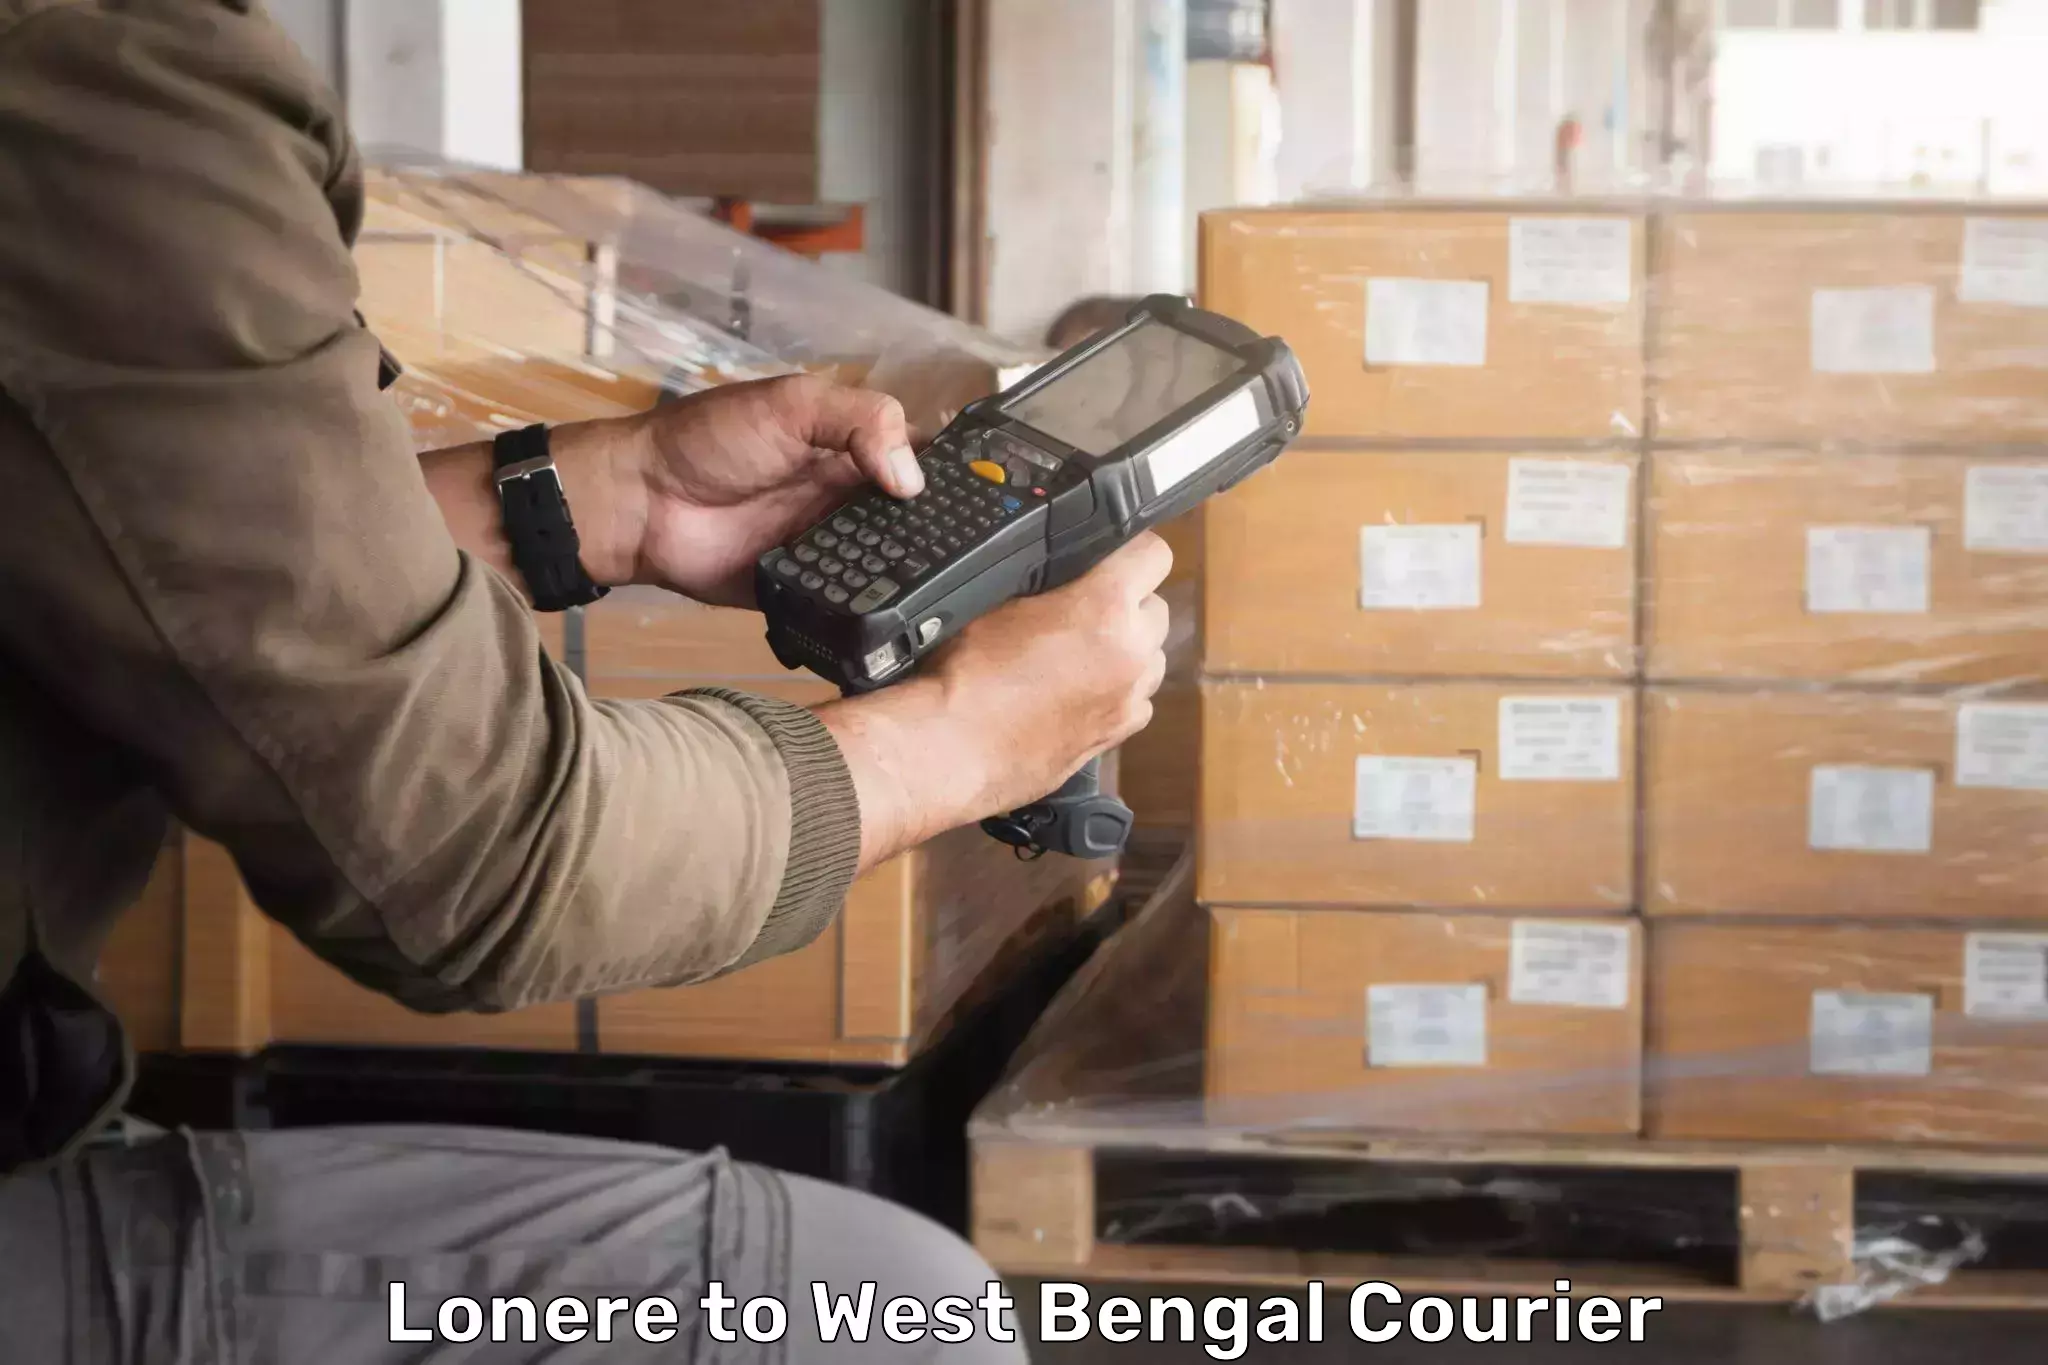 Express delivery network Lonere to West Bengal